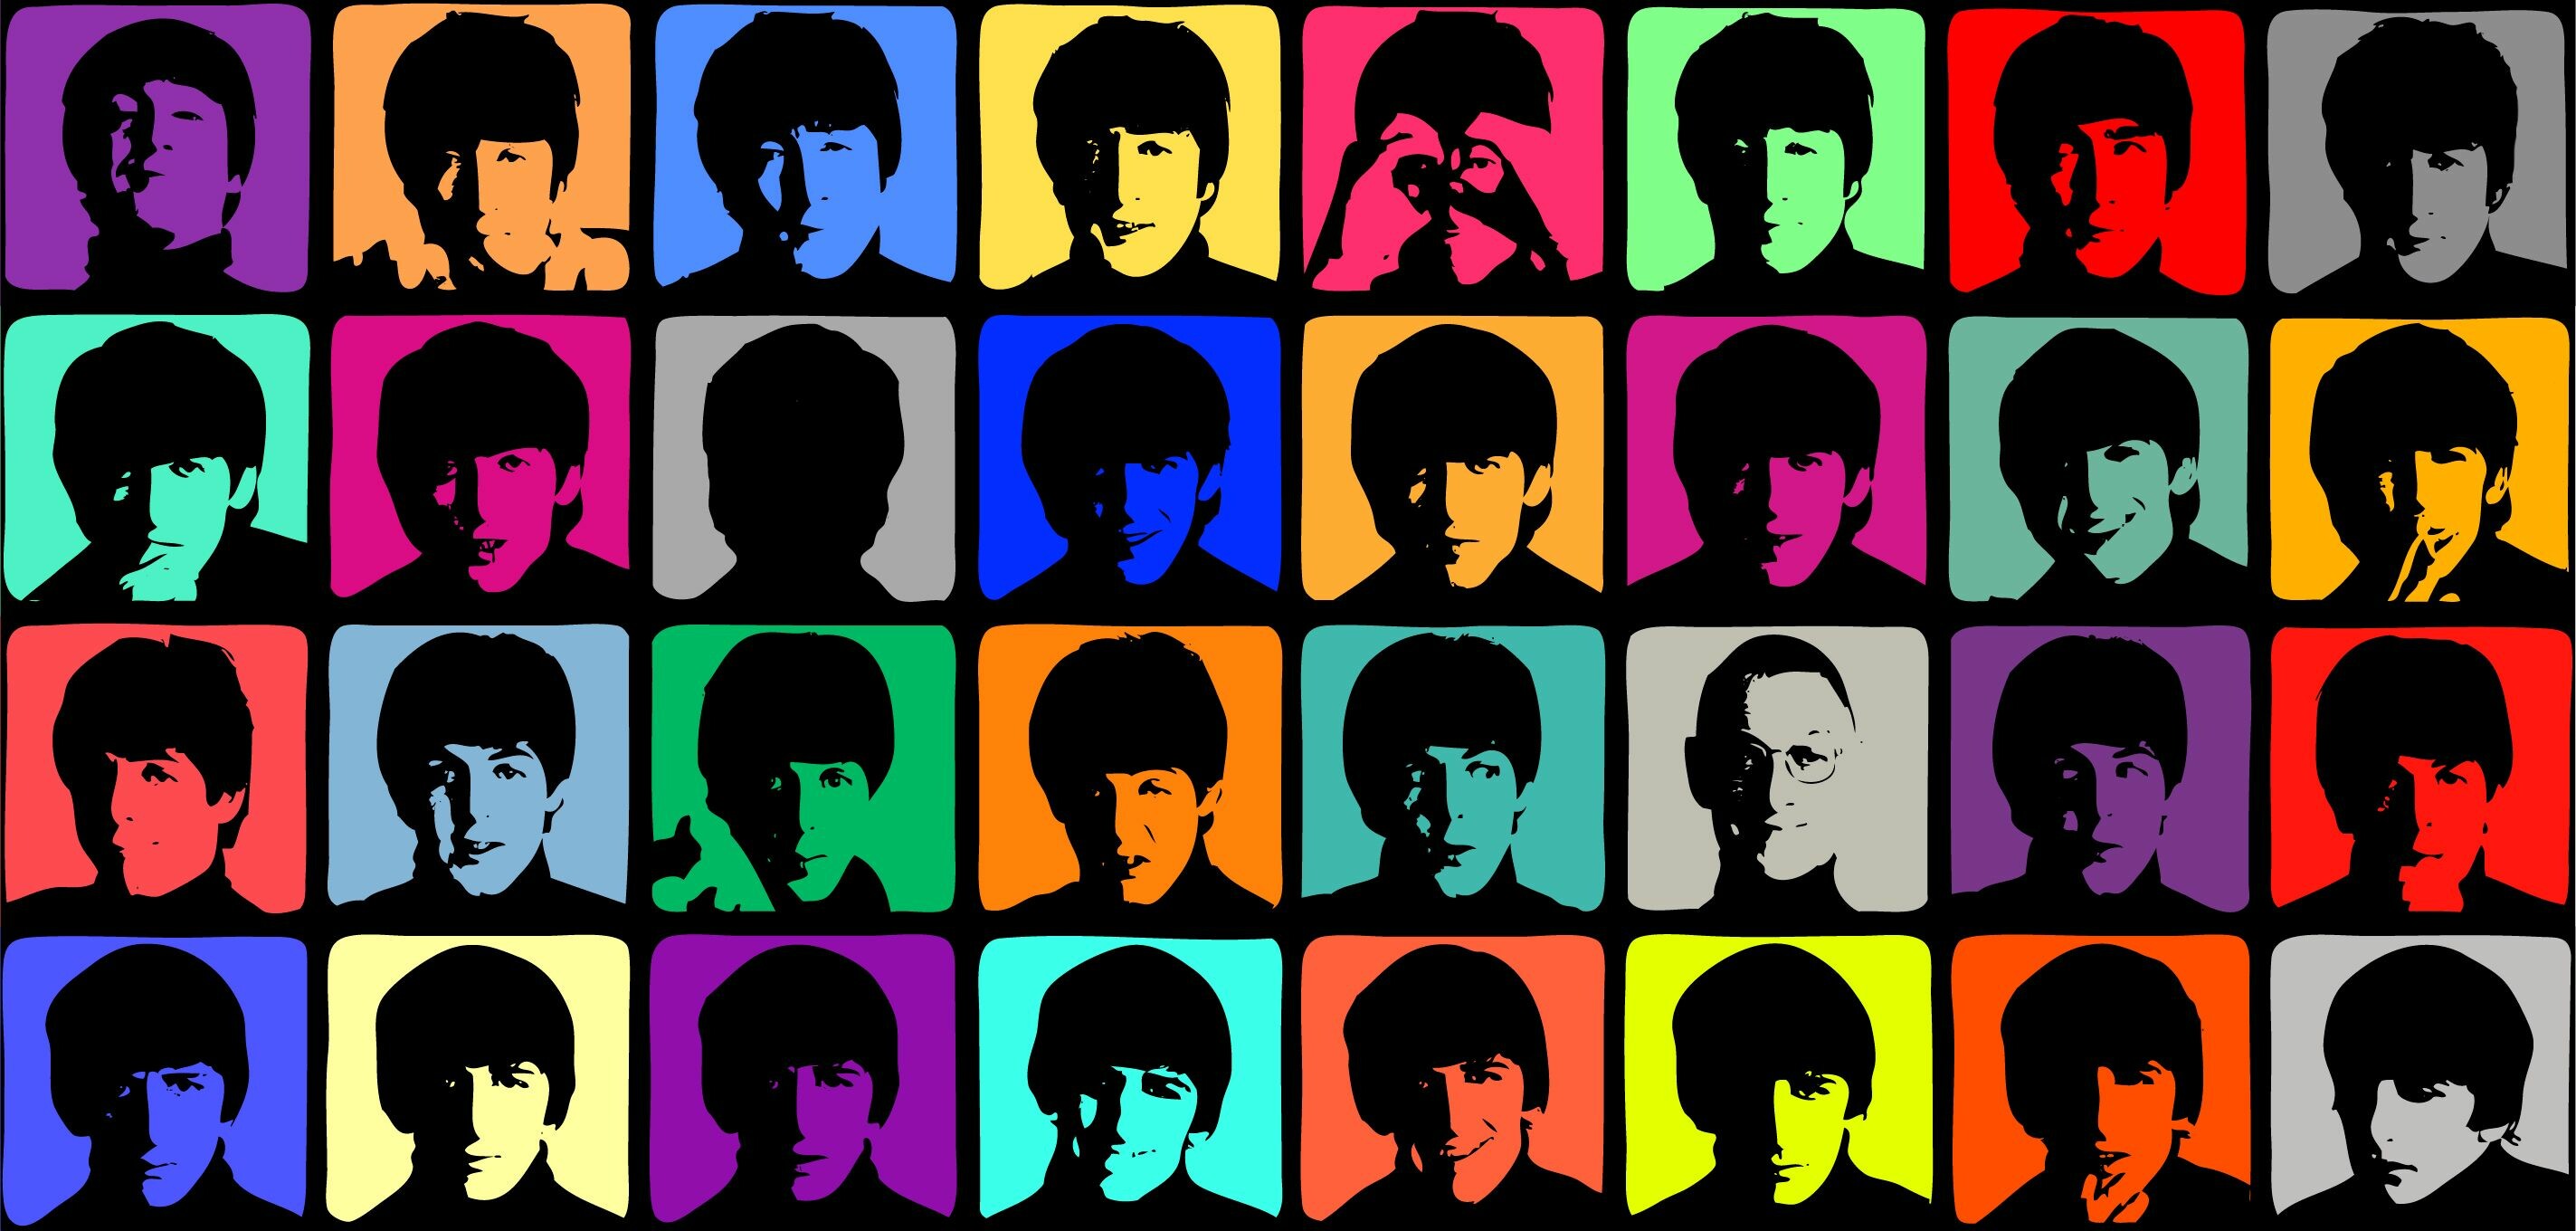 Pop Art: A style of the 1960s, The imagery of mass-media, Beatles. 2850x1360 Dual Screen Wallpaper.